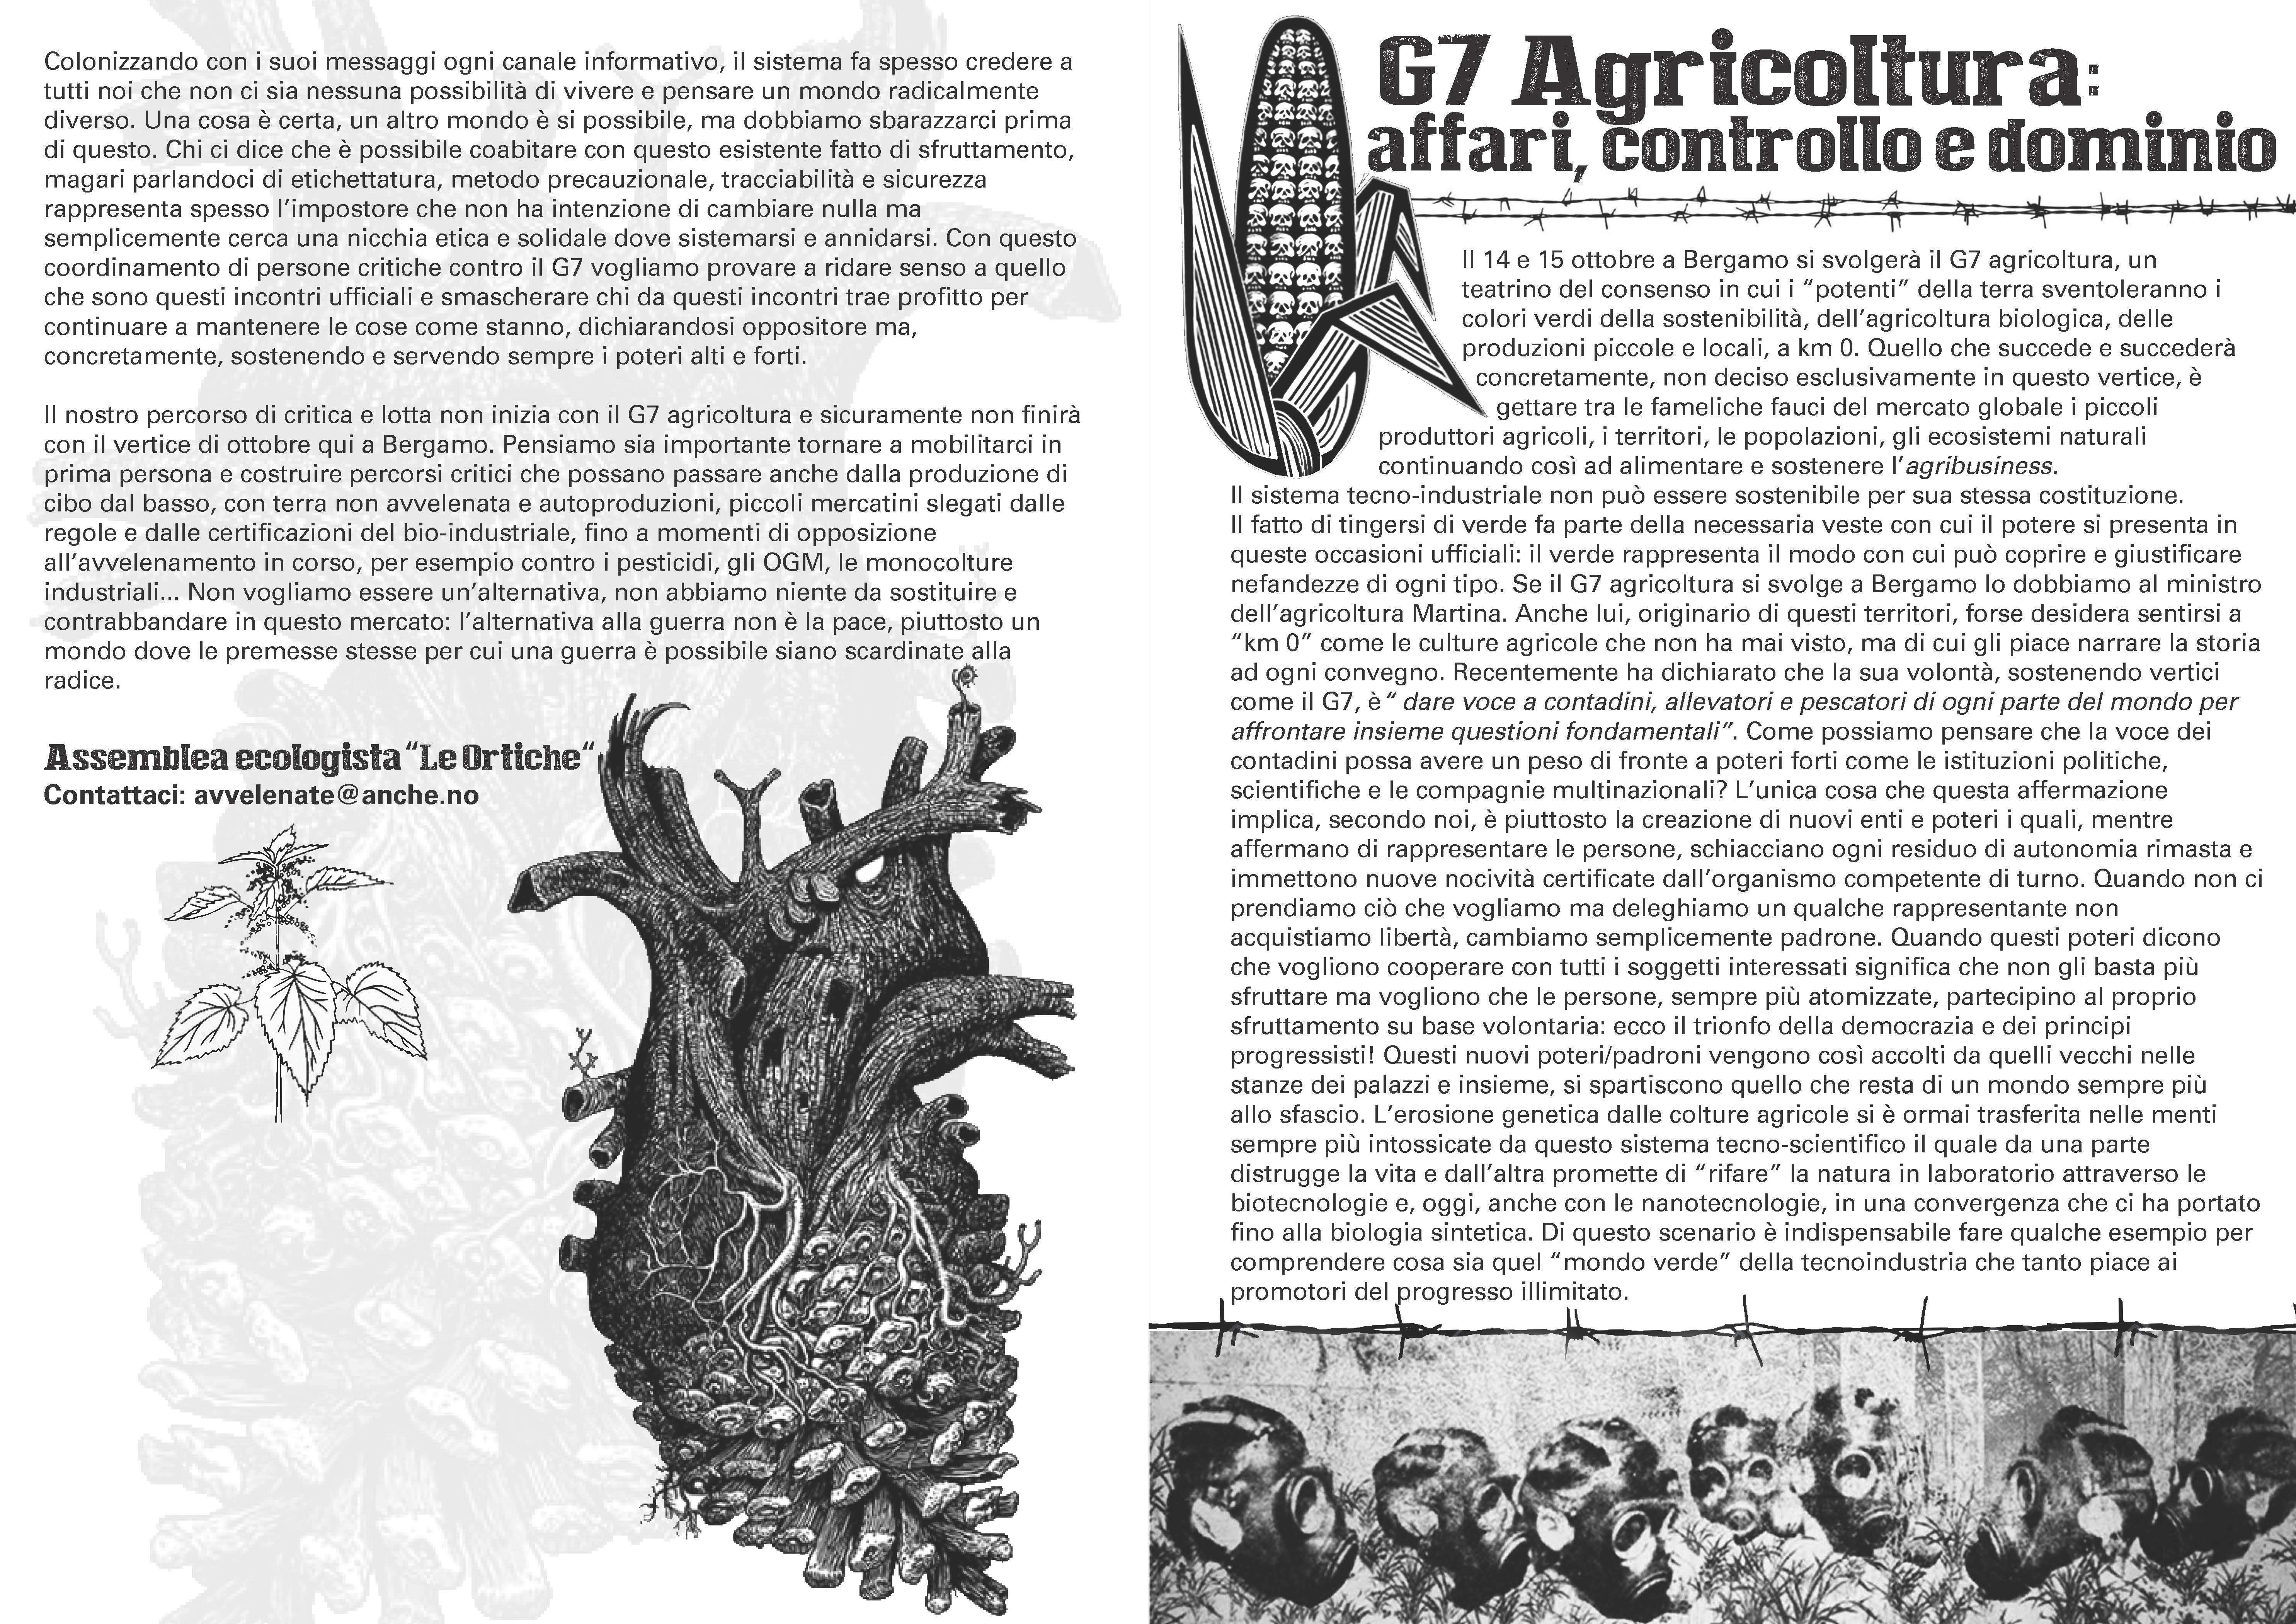 Bergamo, Italy: Confront the G7 Agriculture: October 14-15 -2017